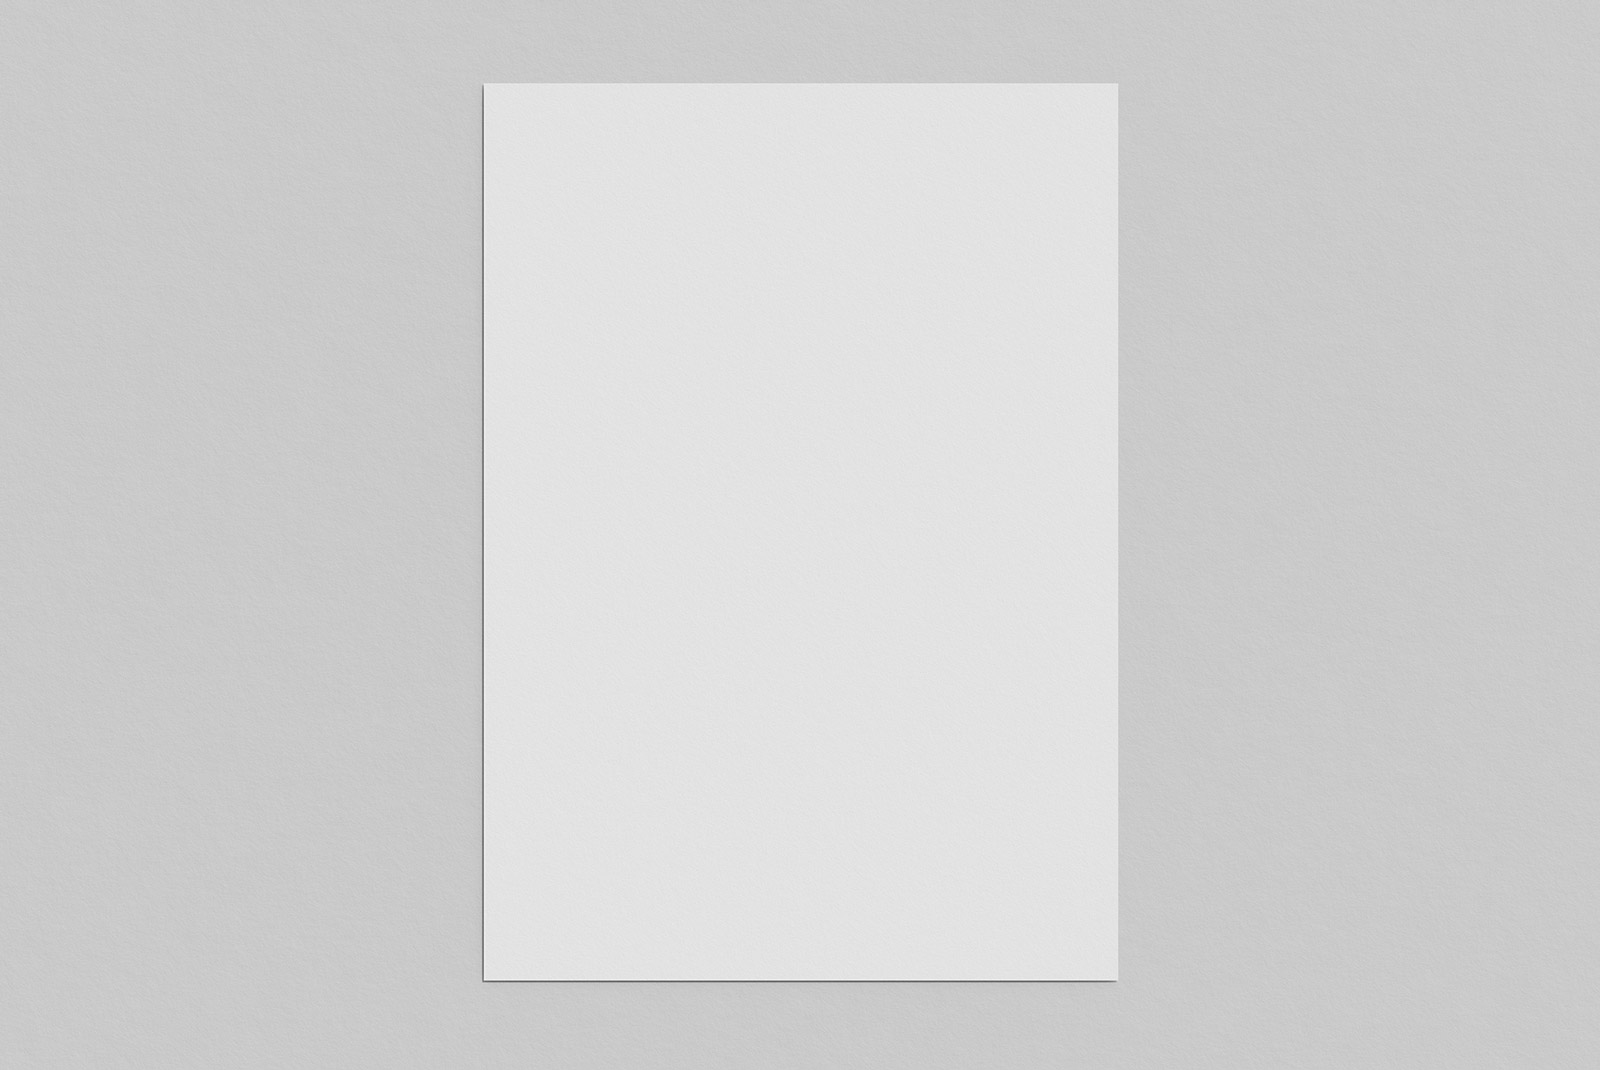 Blank vertical paper mockup with shadow on a plain gray background, ideal for elegant template design presentations. Perfect for digital assets marketplace.